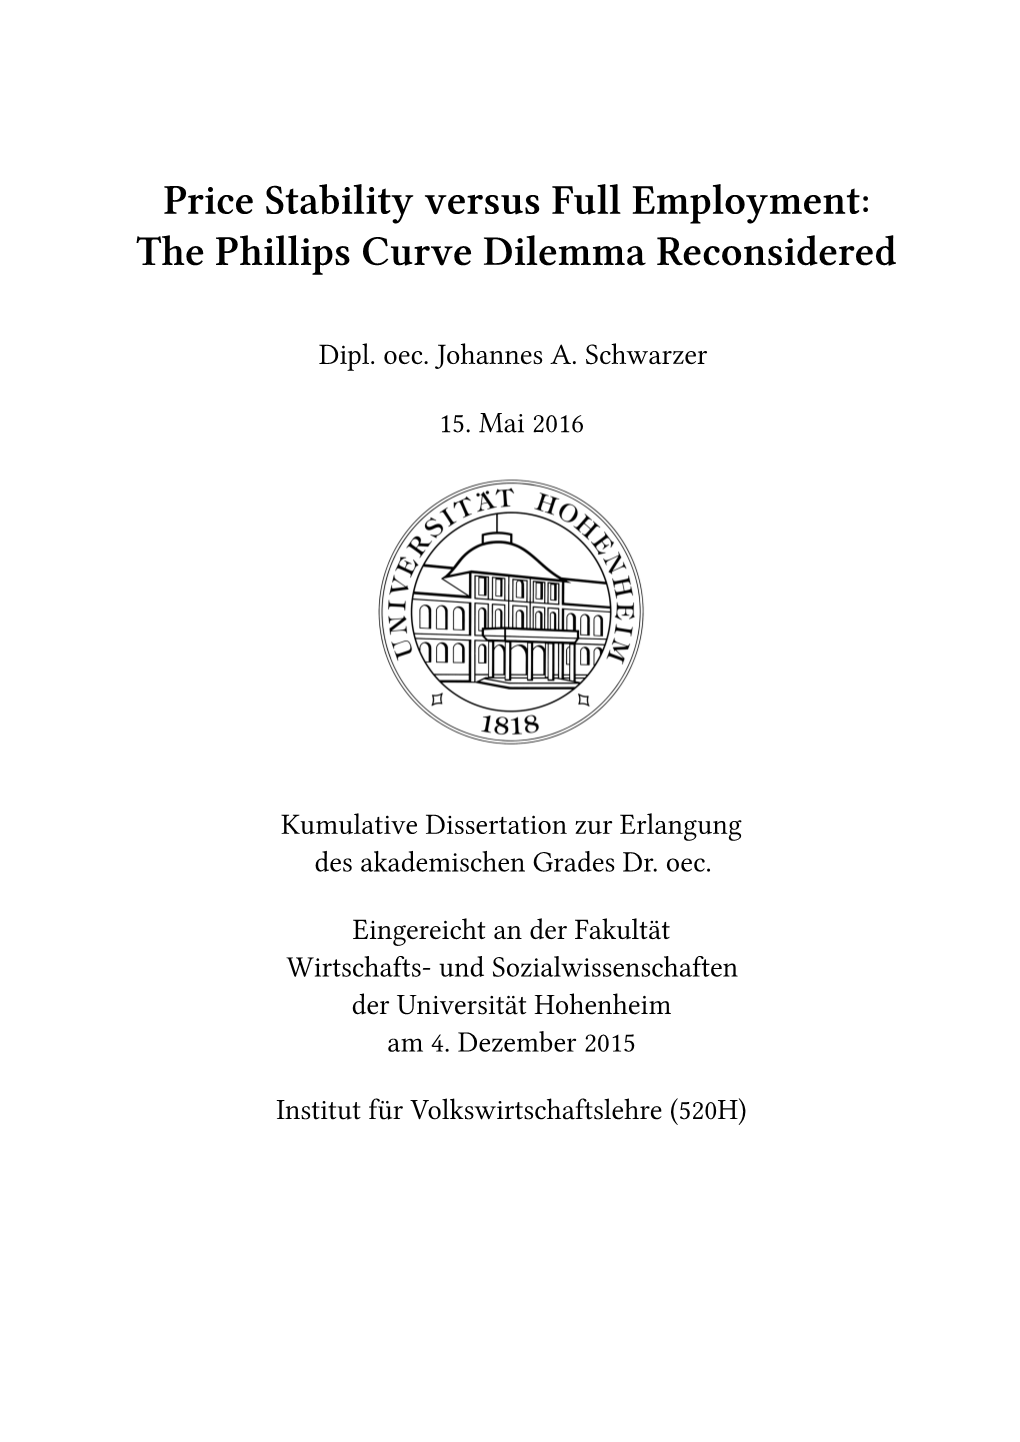 Price Stability Versus Full Employment: the Phillips Curve Dilemma Reconsidered